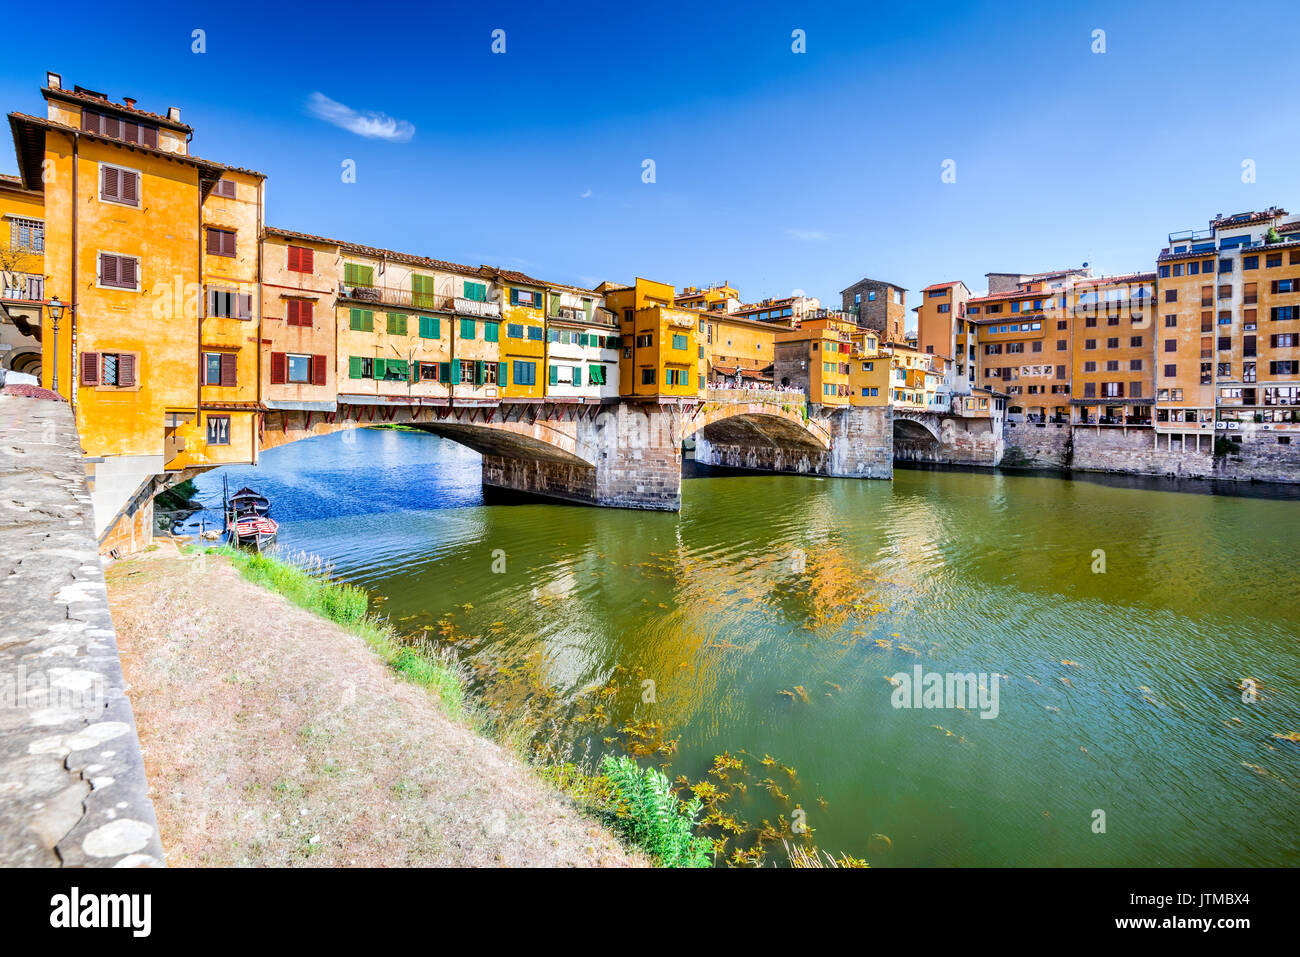 Florence, Tuscany - Ponte Vecchio, medieval bridge sunlighted over Arno River, Italy. Stock Photo